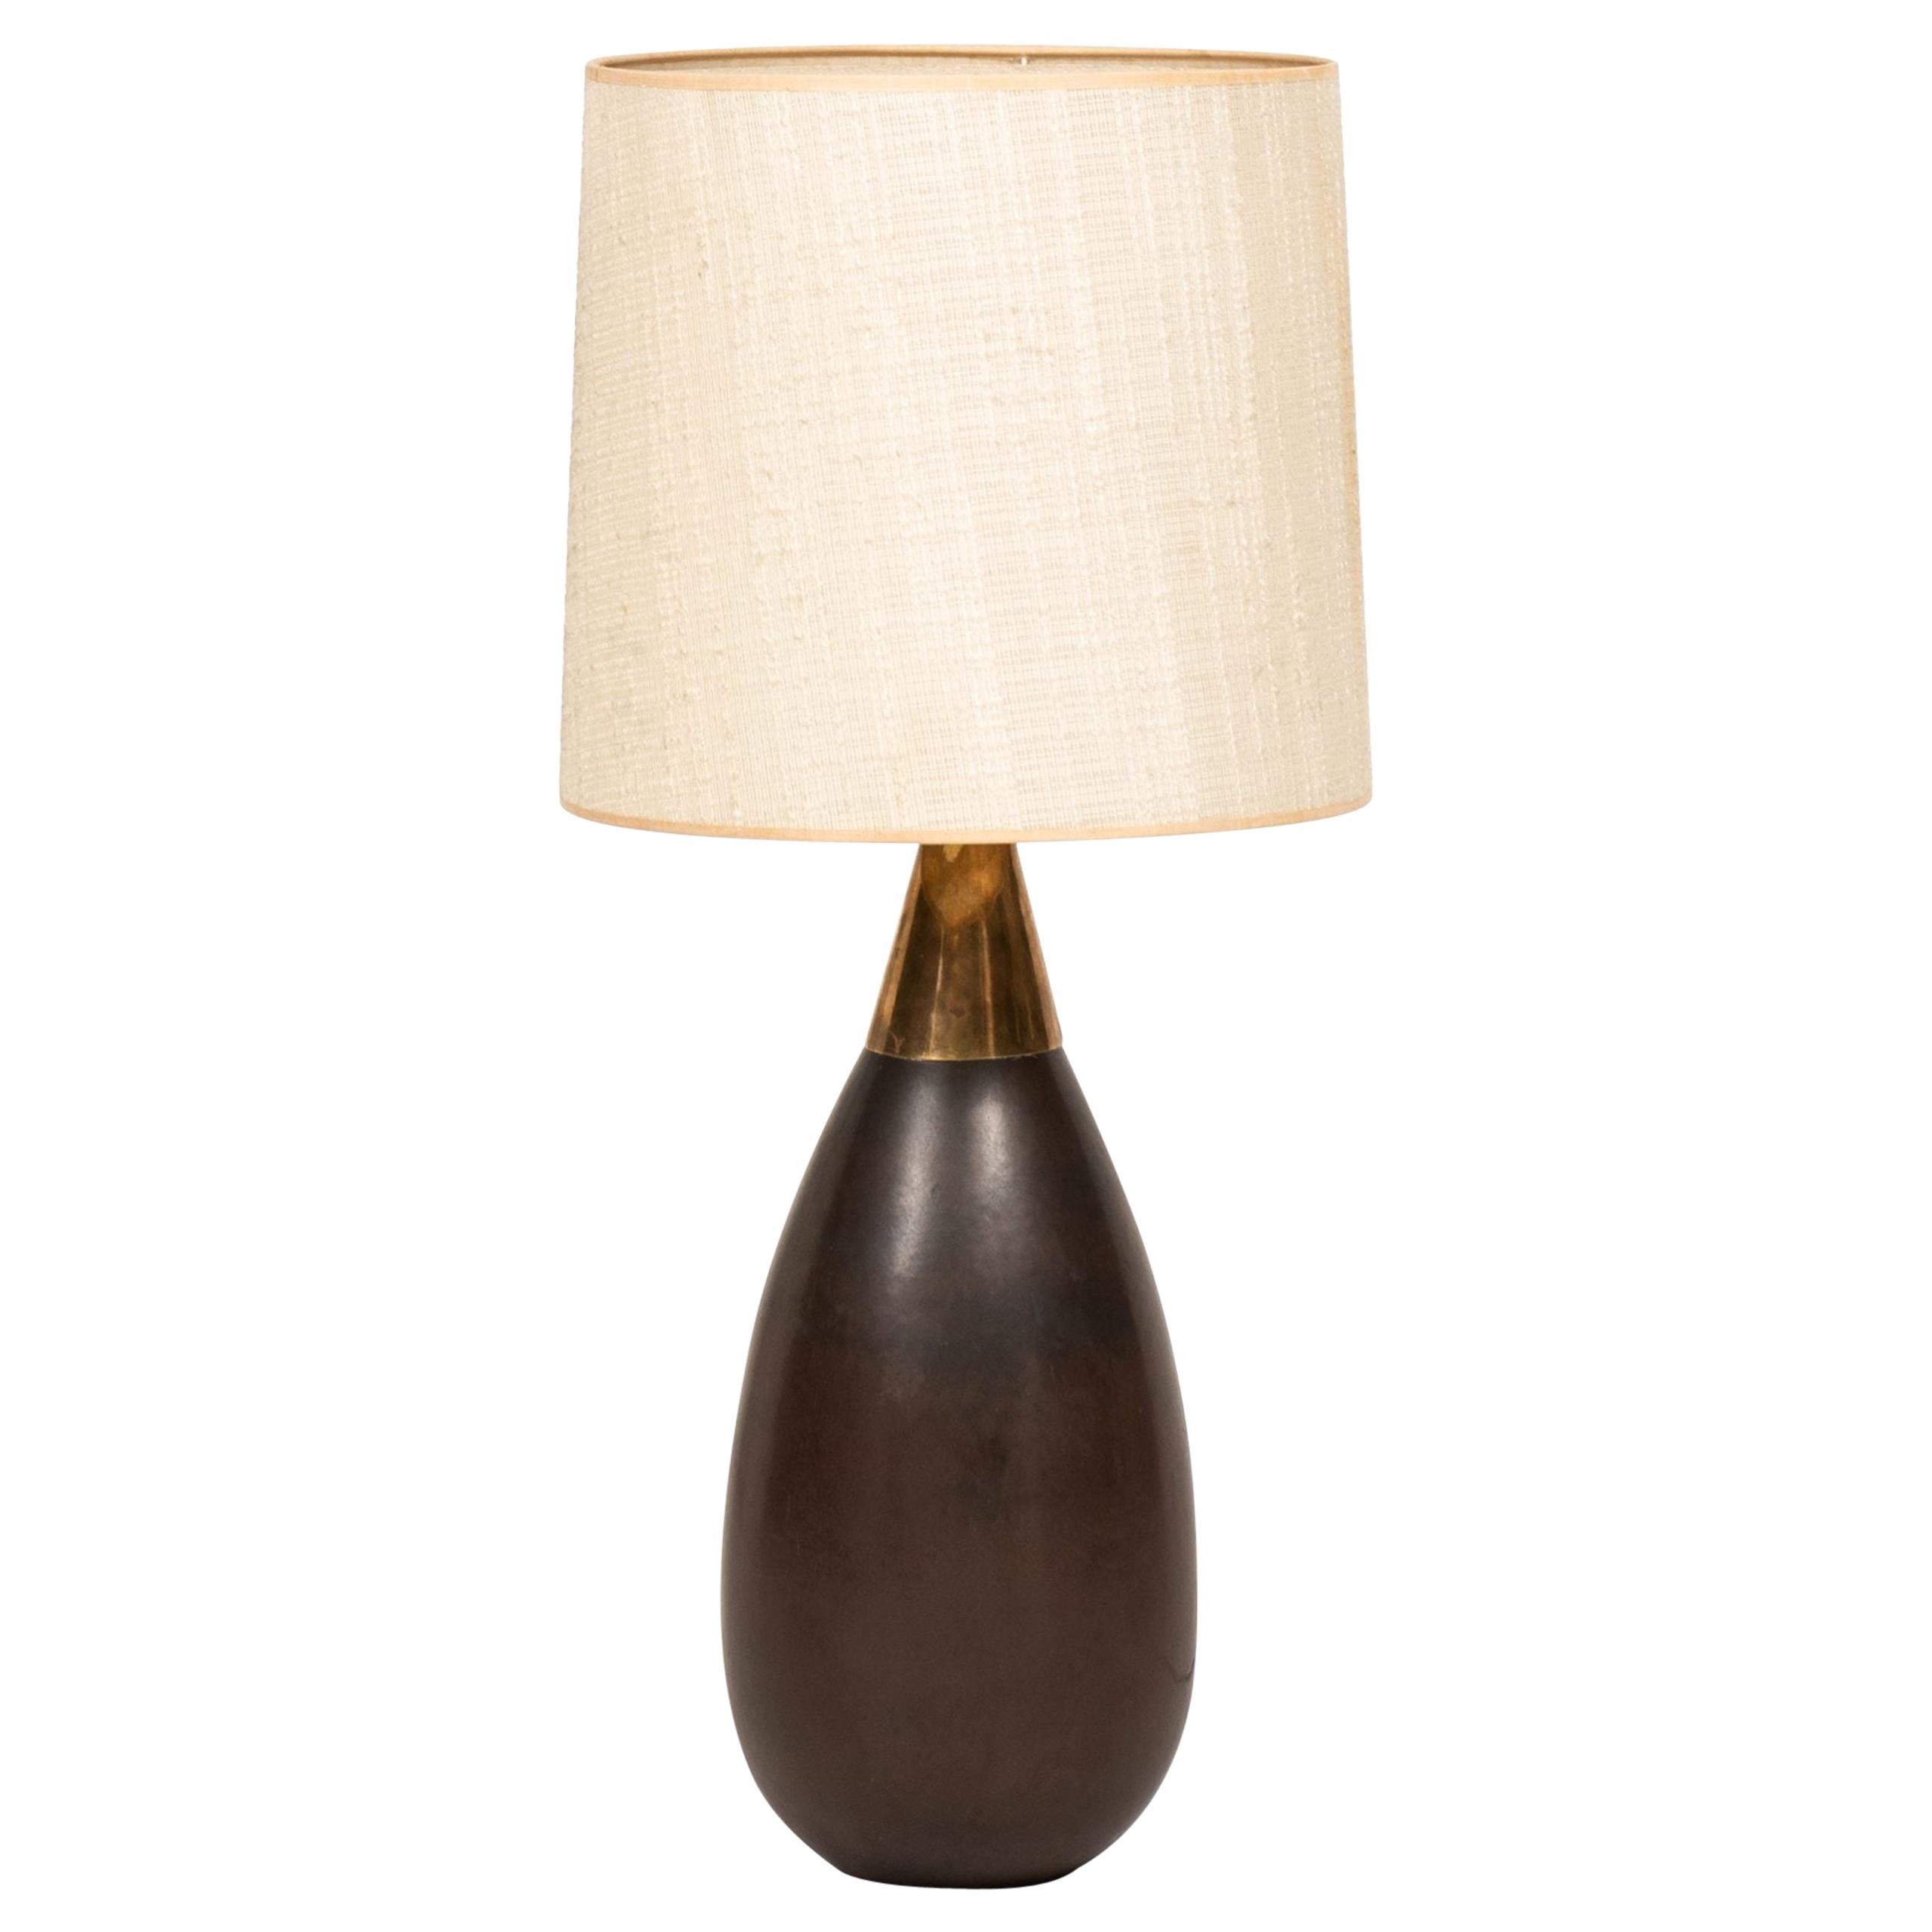 Carl-Harry Stålhane Table Lamp Produced by Rörstrand in Sweden